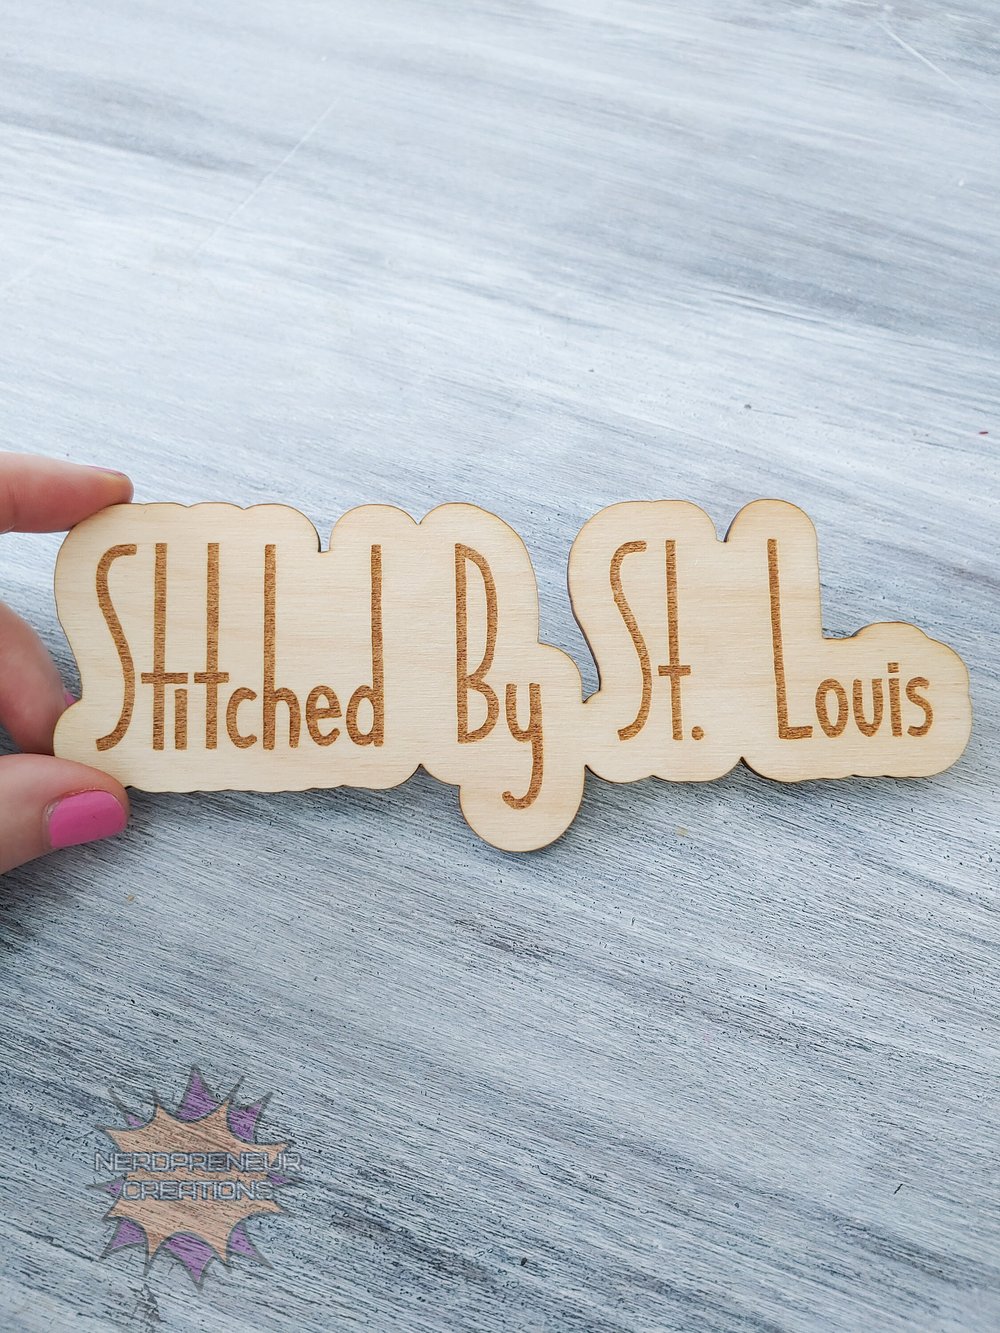 Image of Custom Wooden Name Plate for Photo Props and Watermarking